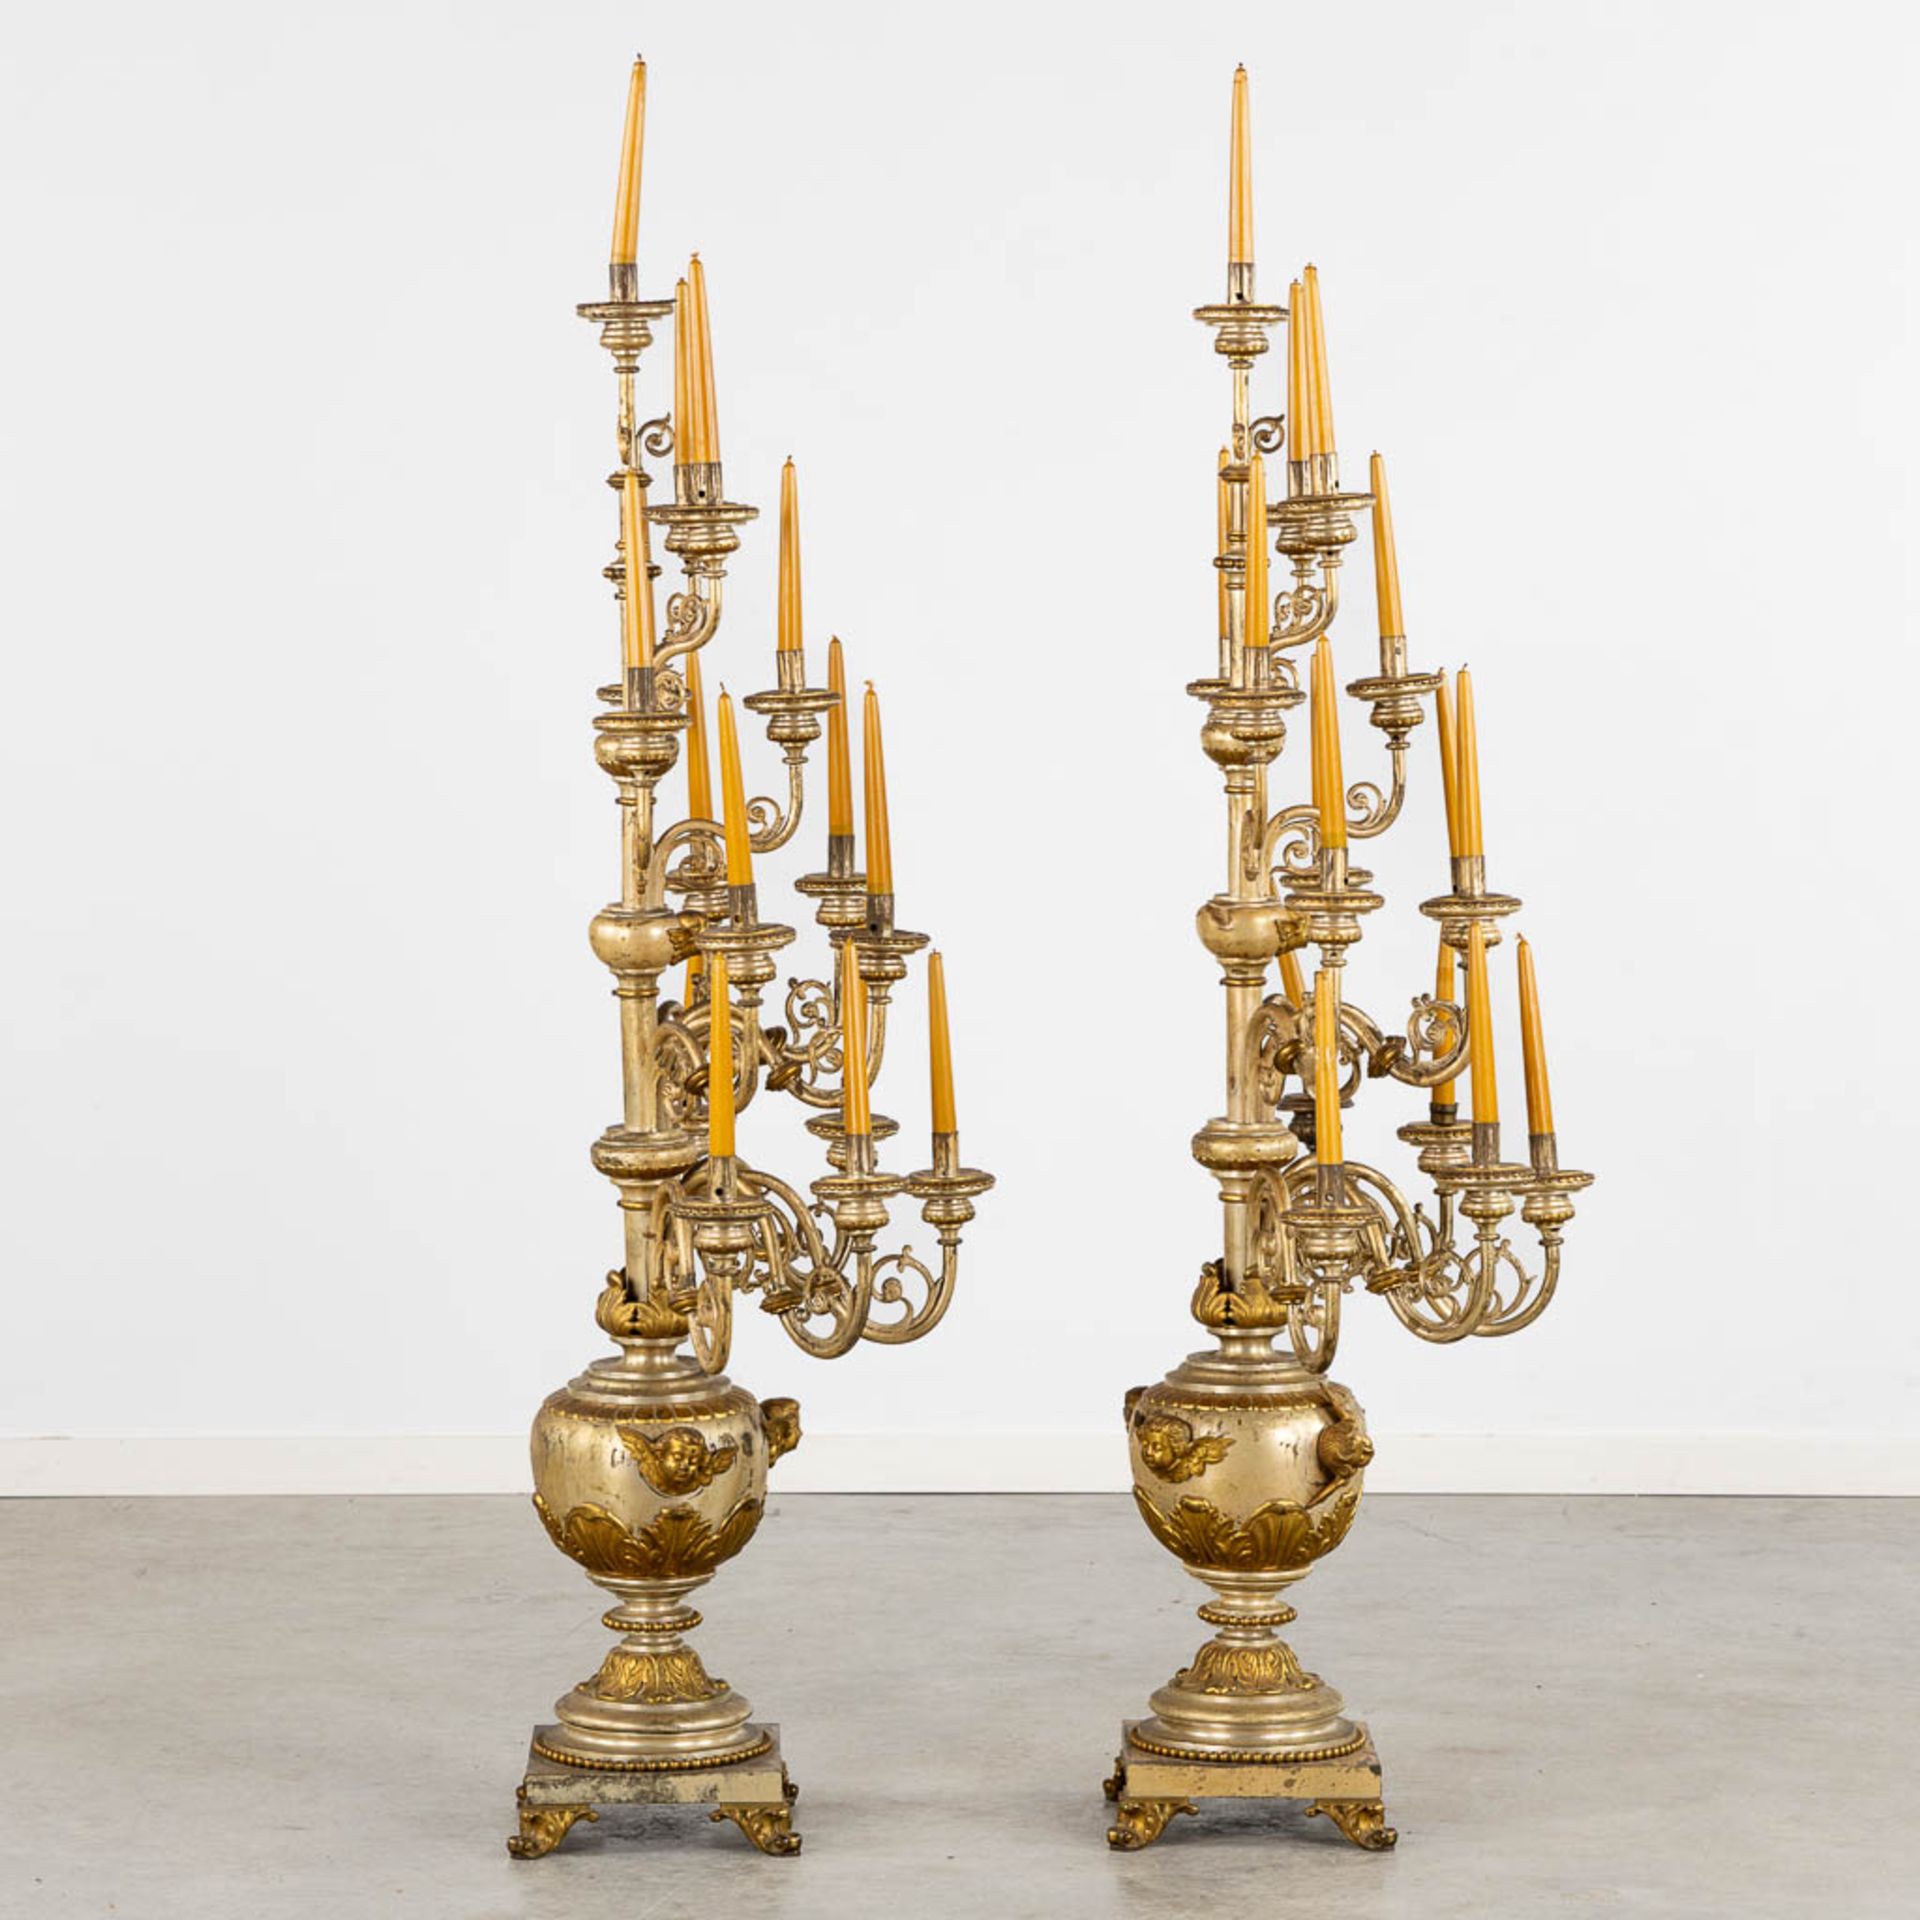 An impressive pair of candelabra, 15 candles, gold and silver-plated metal. (L:44 x W:60 x H:138 cm) - Image 7 of 12